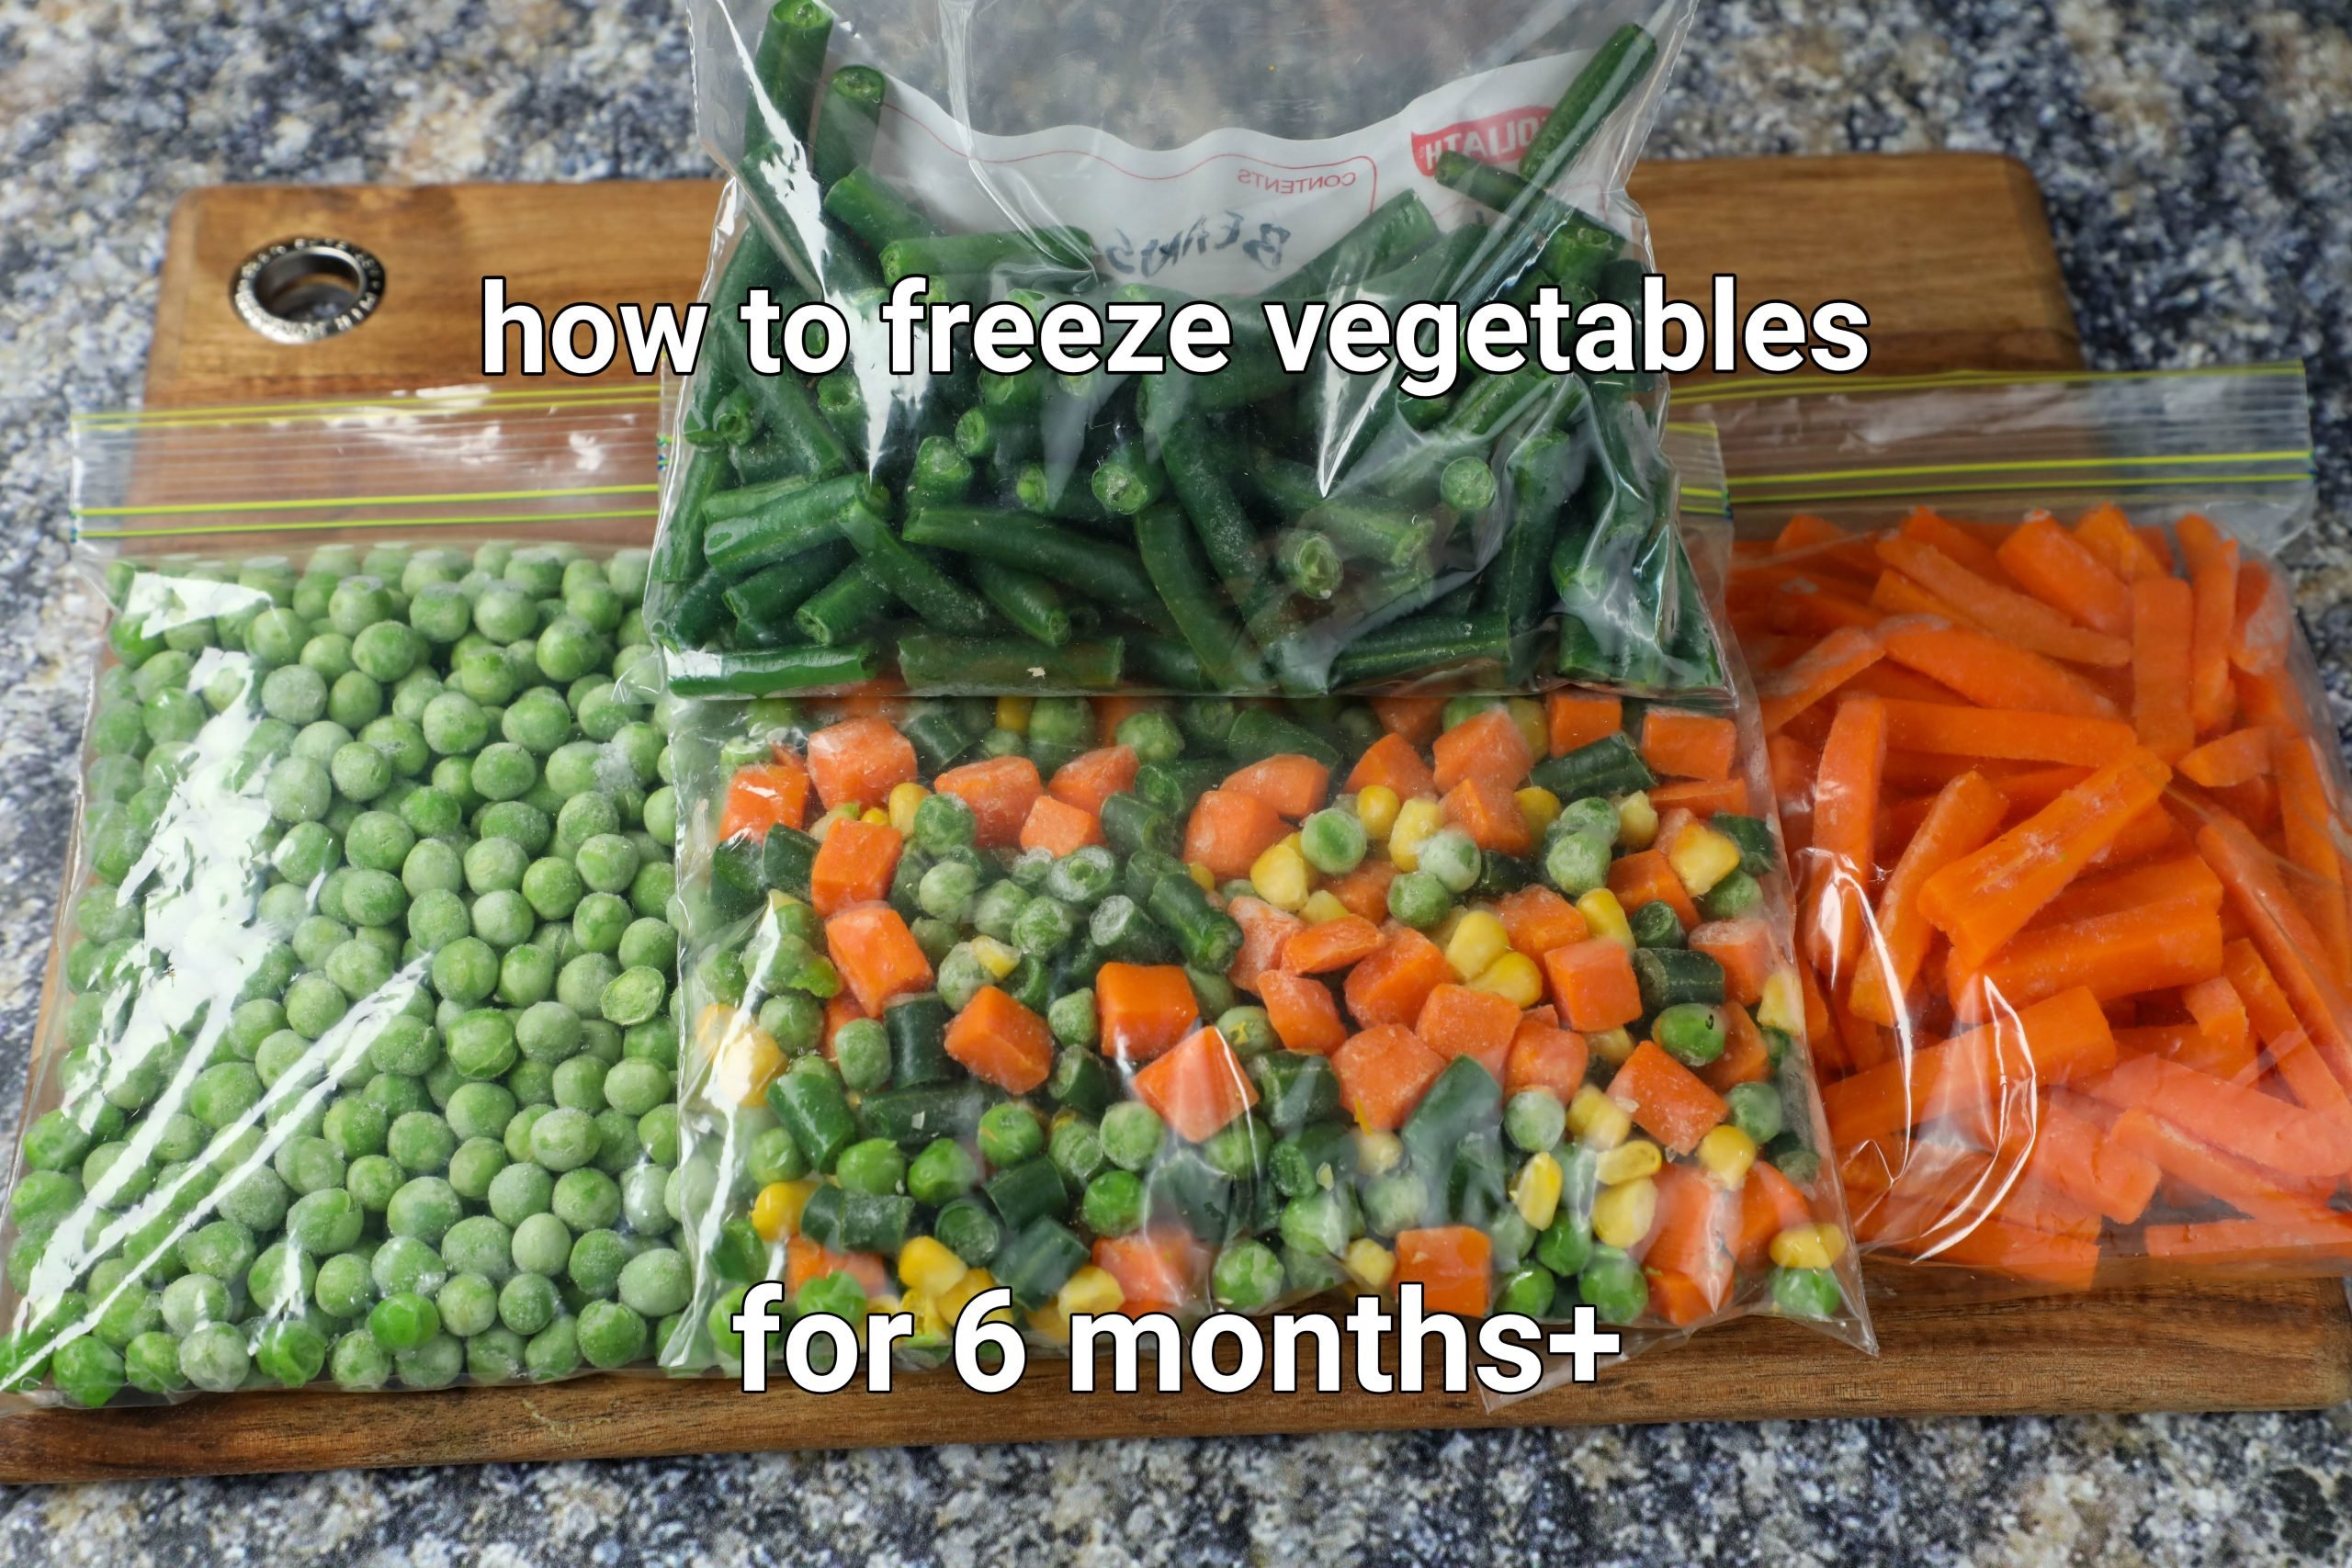 https://hebbarskitchen.com/wp-content/uploads/2021/01/how-to-freeze-vegetables-at-home-frozen-peas-green-beans-carrots-mixed-vegetables-1-scaled.jpeg